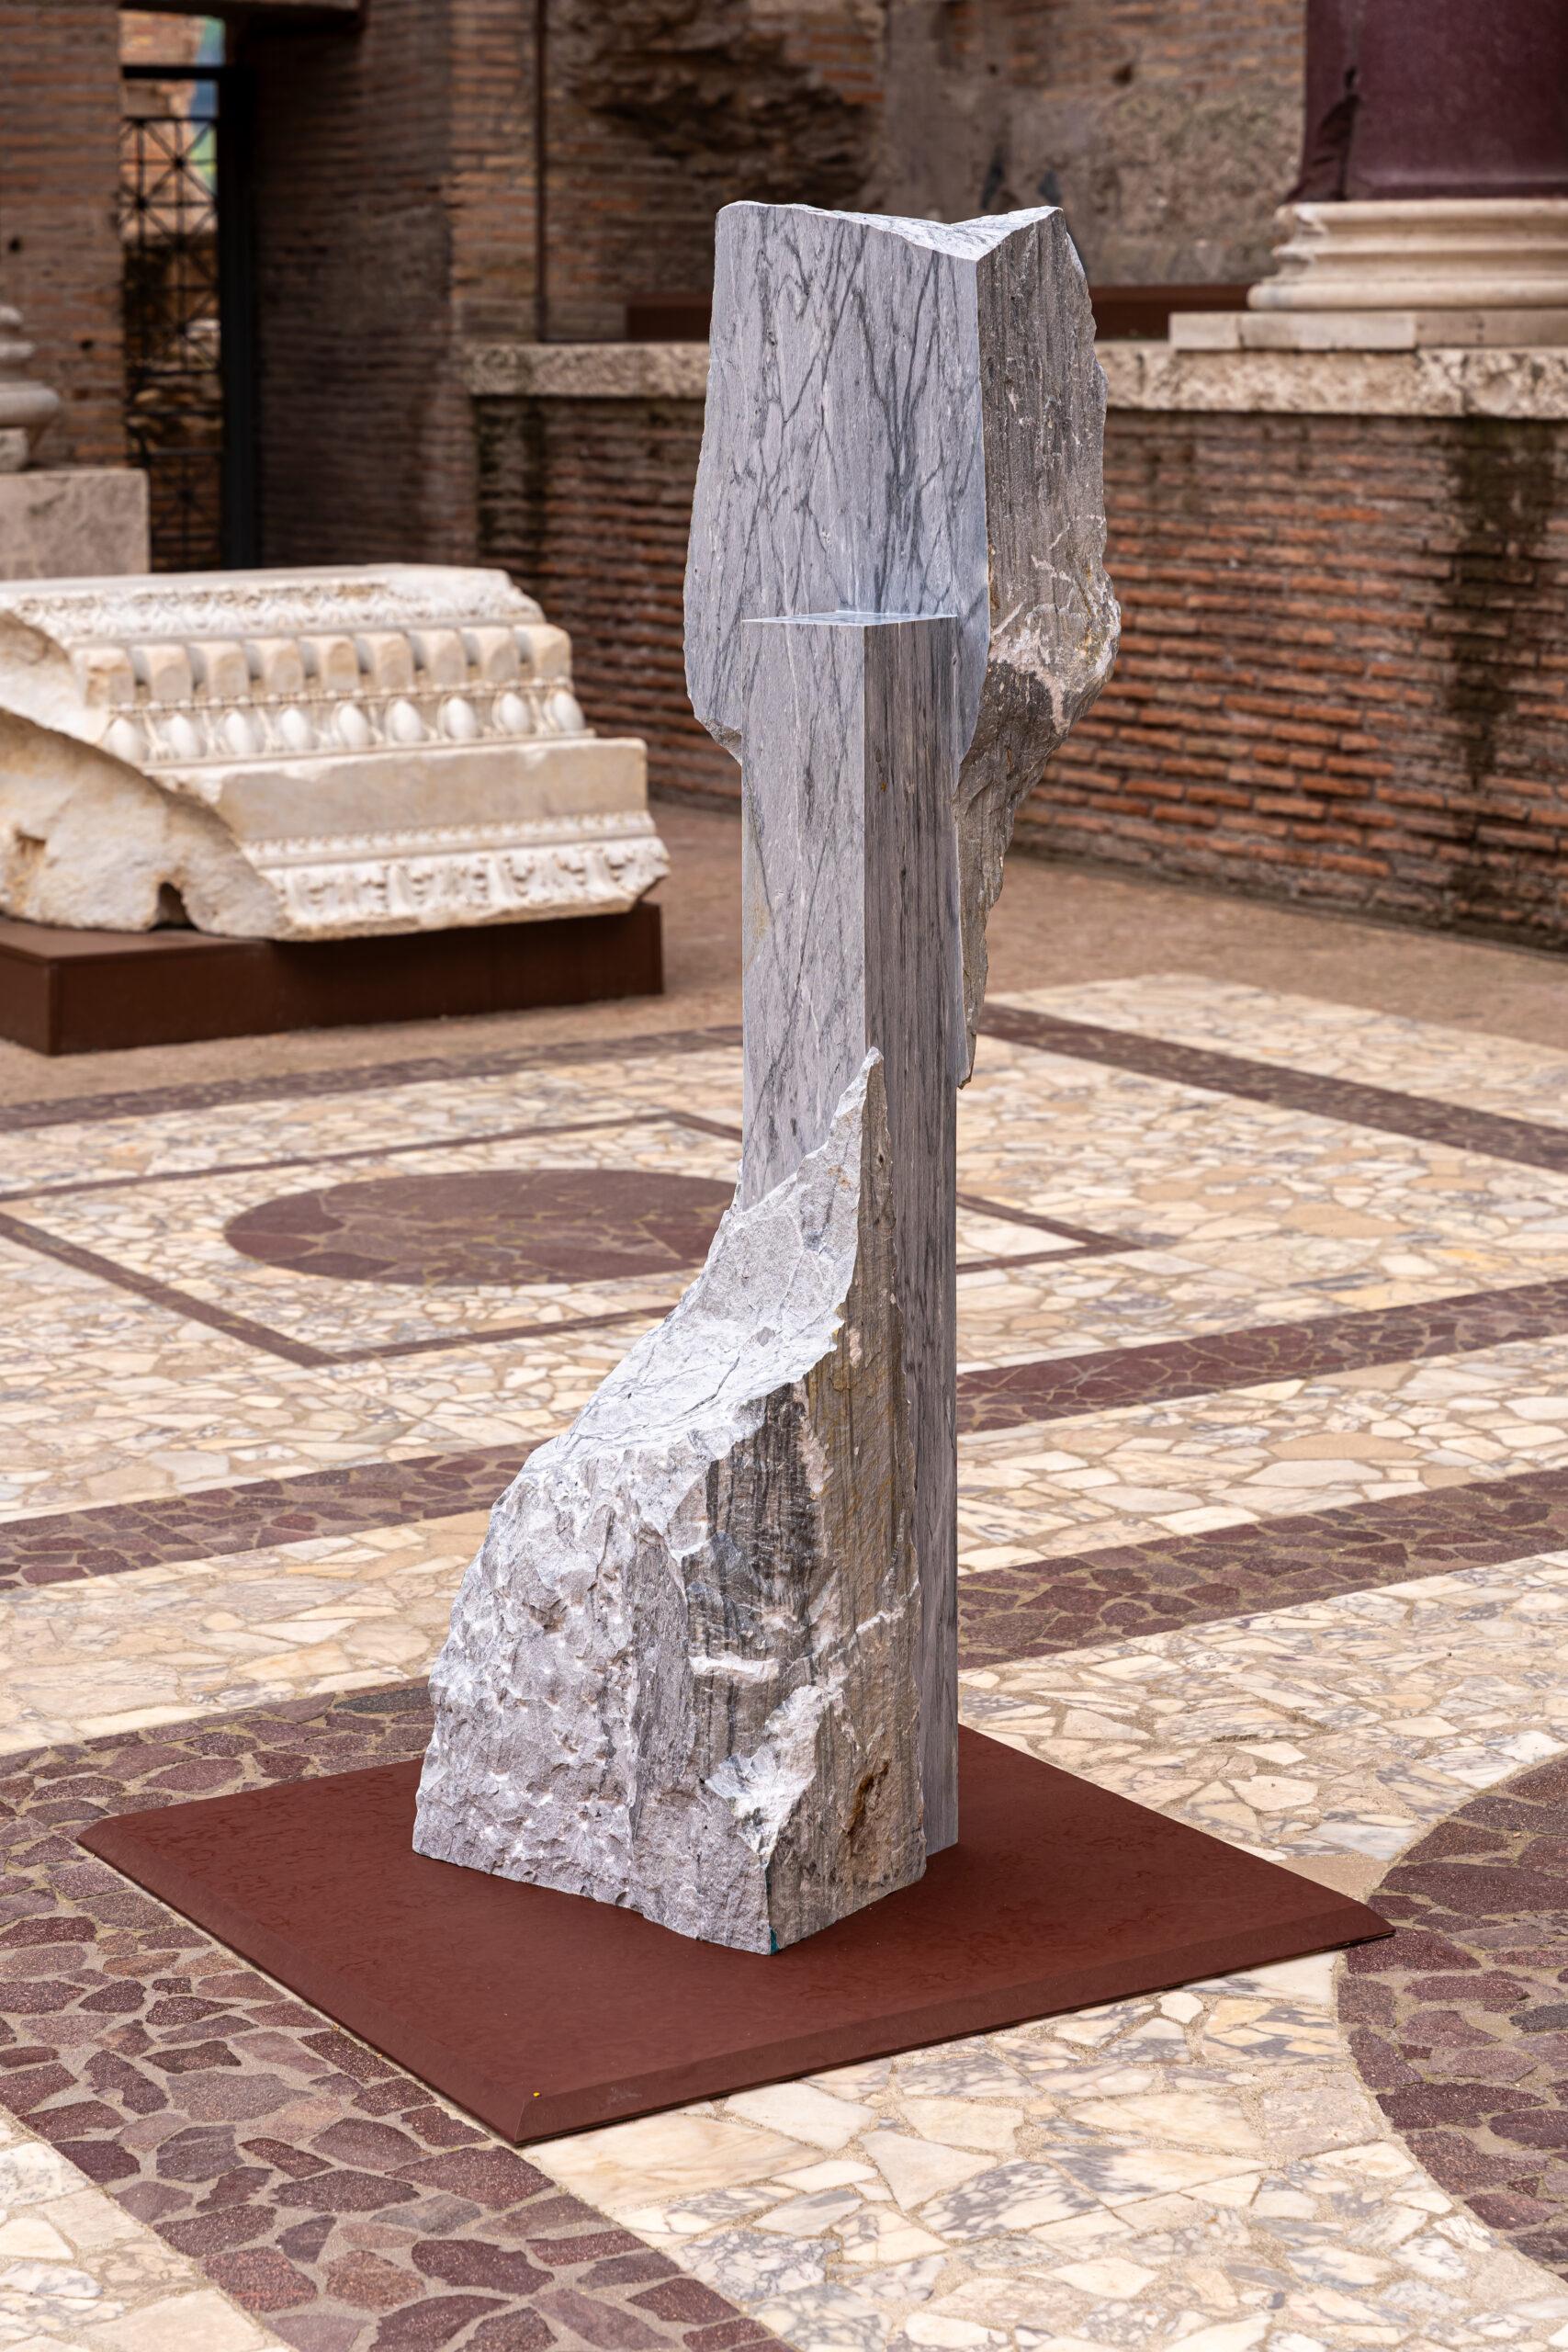 Korè-Bardiglio is a unique monumental sculpture by contemporary artist Mattia Bosco. This sculpture is made of Bardiglio marble, dimensions are 173 × 52 × 66 cm (68.1 × 20.5 × 26 in). 

This piece is a part of a collection of twelve sculptures, two